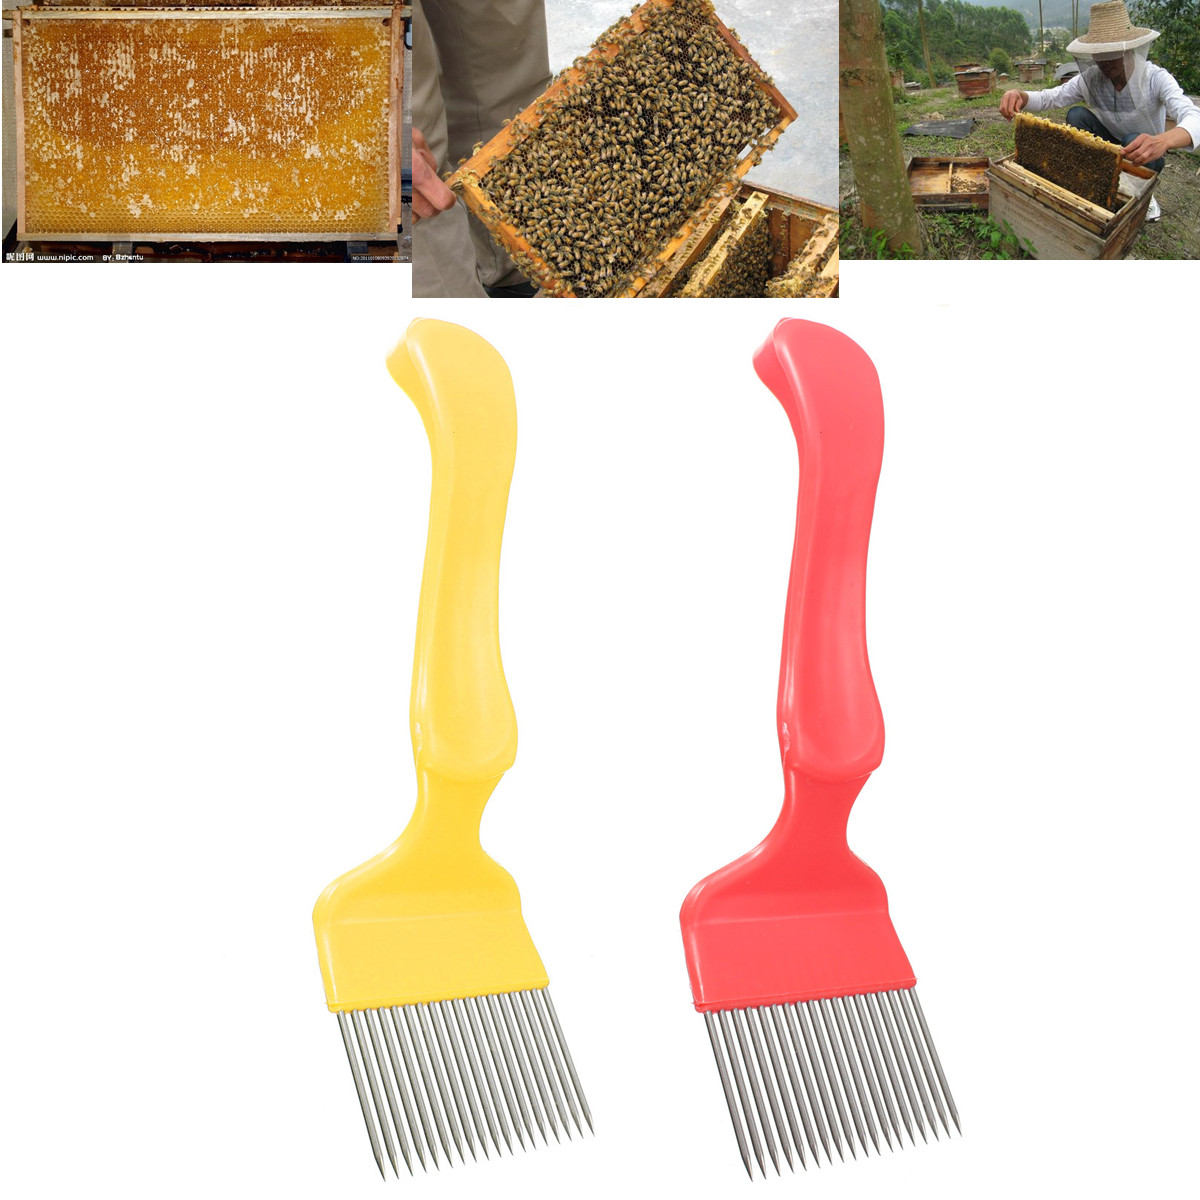 

Stainless Steel Honey Comb Beekeeping Tine Uncapping Fork Hive Tool